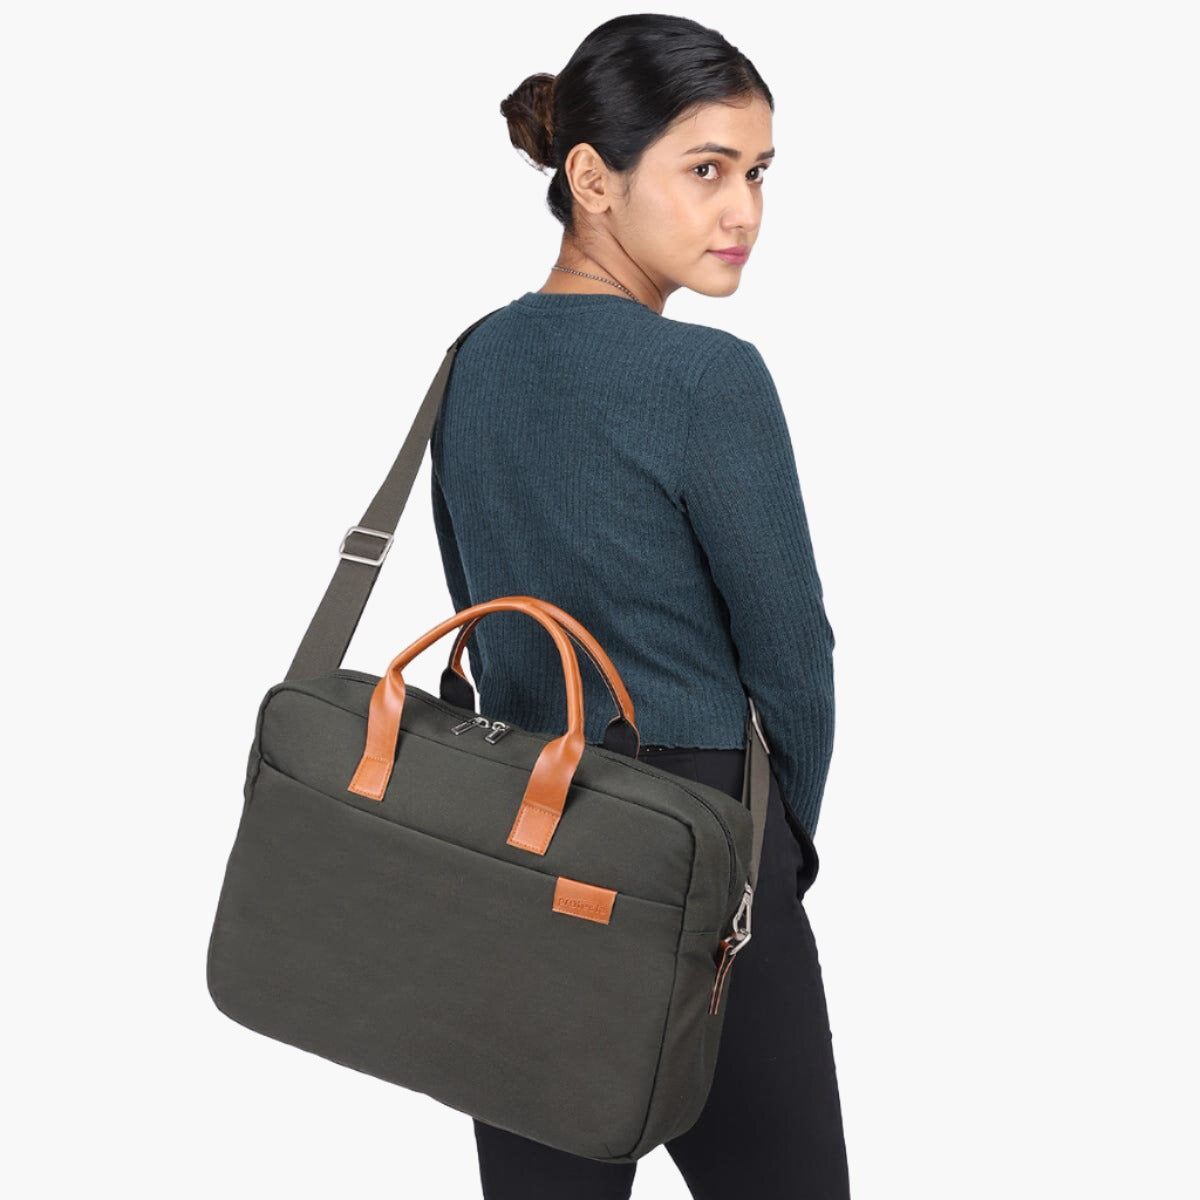 Olive | Protecta The Strong Buzz Office Laptop Bag - 5